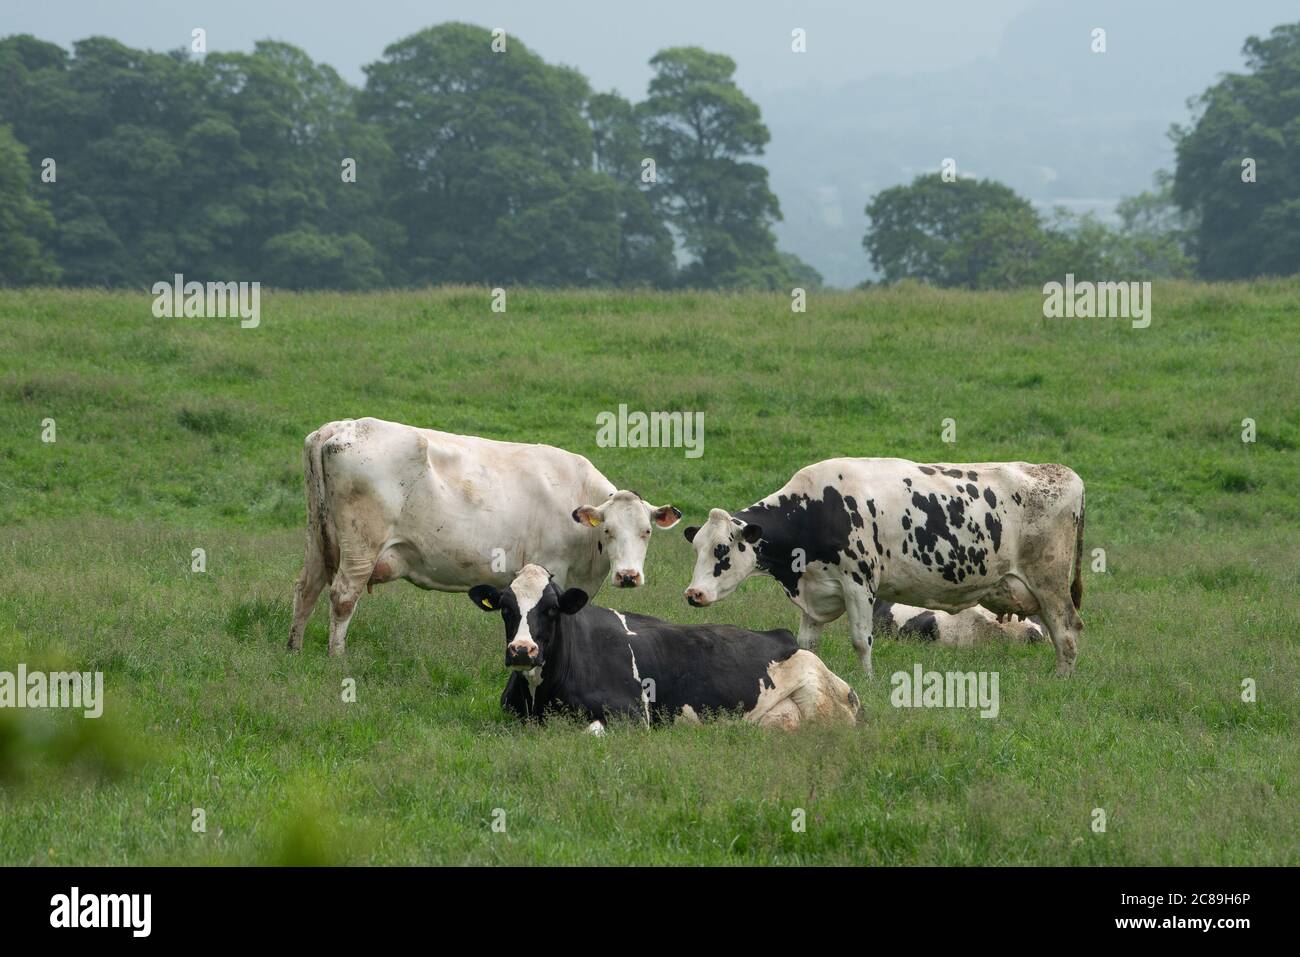 Holstein dairy cows in a field, Chipping, Preston, Lancashire. UK. Stock Photo